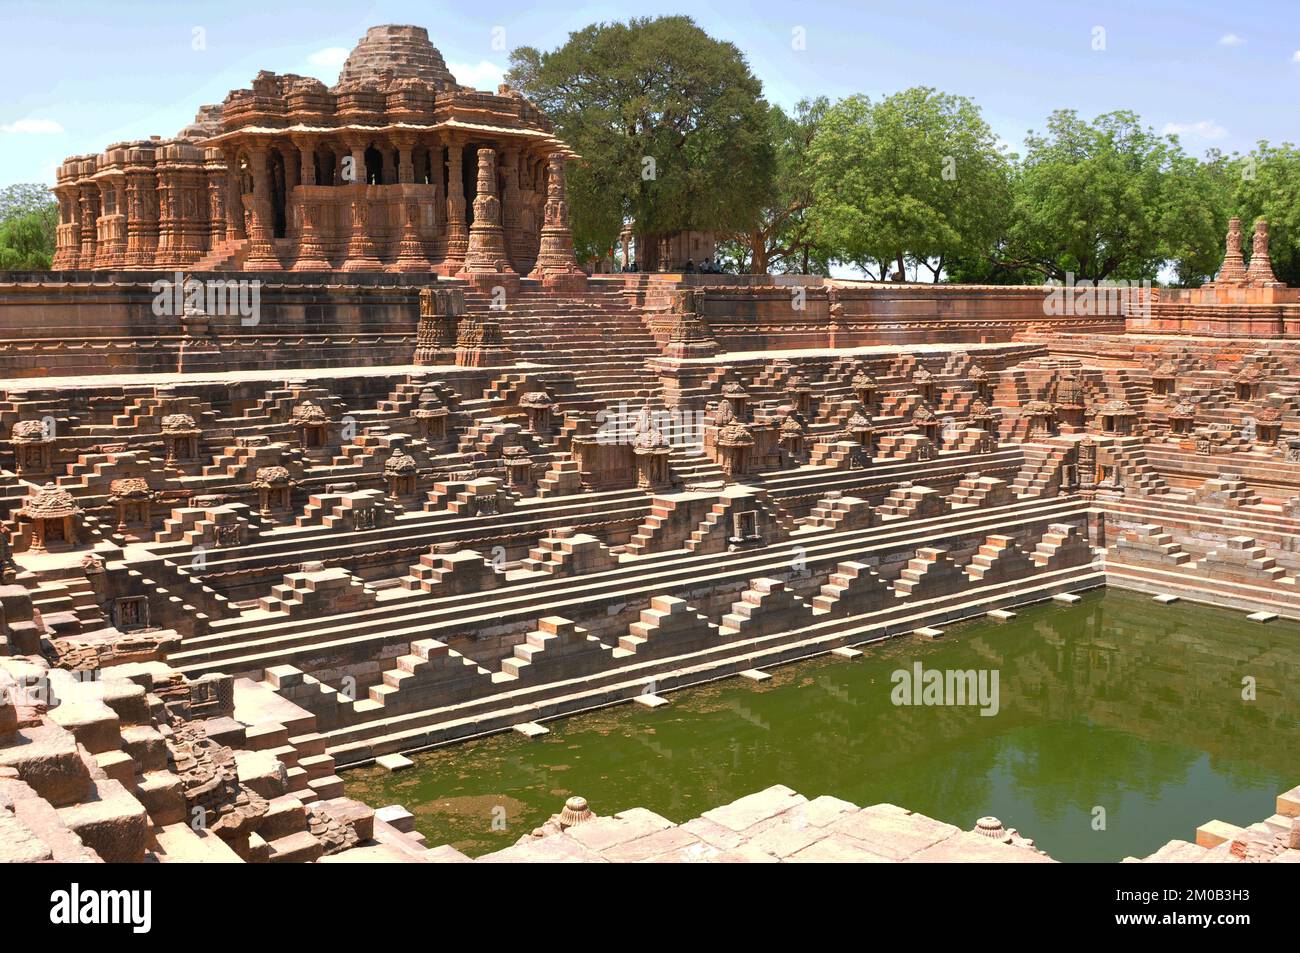 The Sandstone Sun temple at Modhera in Gujarat, India, built 1027 AD from King Bhimdev Stock Photo